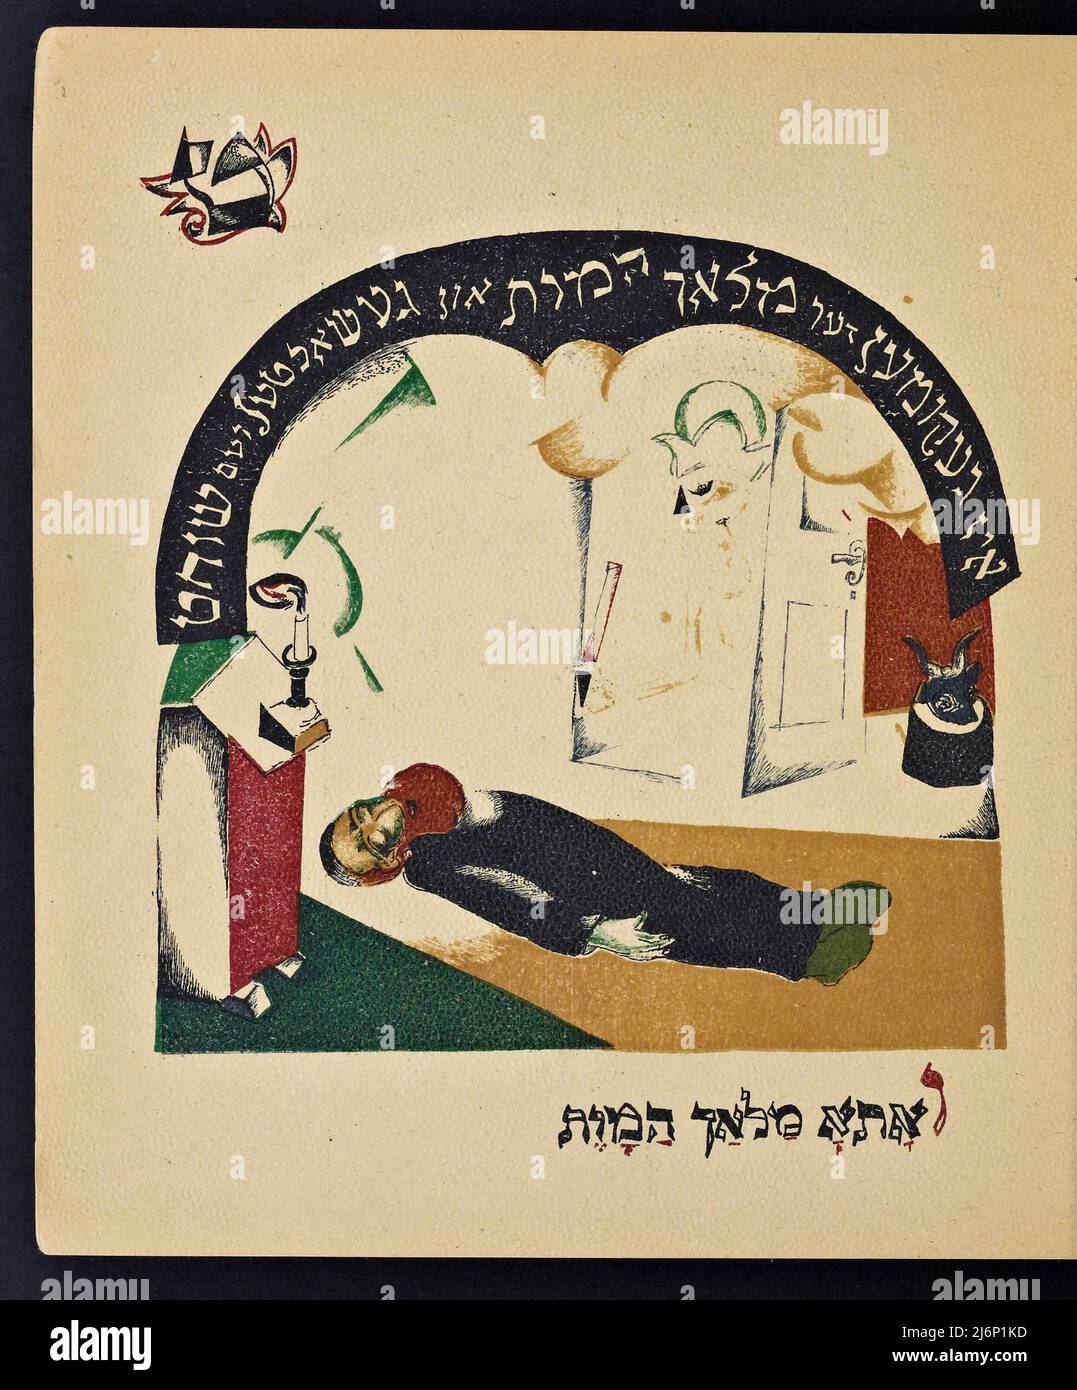 Illustrated Yiddish version of Had Gadya children's book illustrated by El Lissitzky (Lazar Markovich Lissitzky), and published in Kiev in 1919 Chad Gadya or Had Gadya ('one little goat, or 'one kid') is a playful cumulative song in Aramaic and Hebrew. It is sung at the end of the Passover Seder, the Jewish ritual feast that marks the beginning of the Jewish holiday of Passover. The melody may have its roots in Medieval German folk music. It first appeared in a Haggadah printed in Prague in 1590, which makes it the most recent inclusion in the traditional Passover seder liturgy Stock Photo